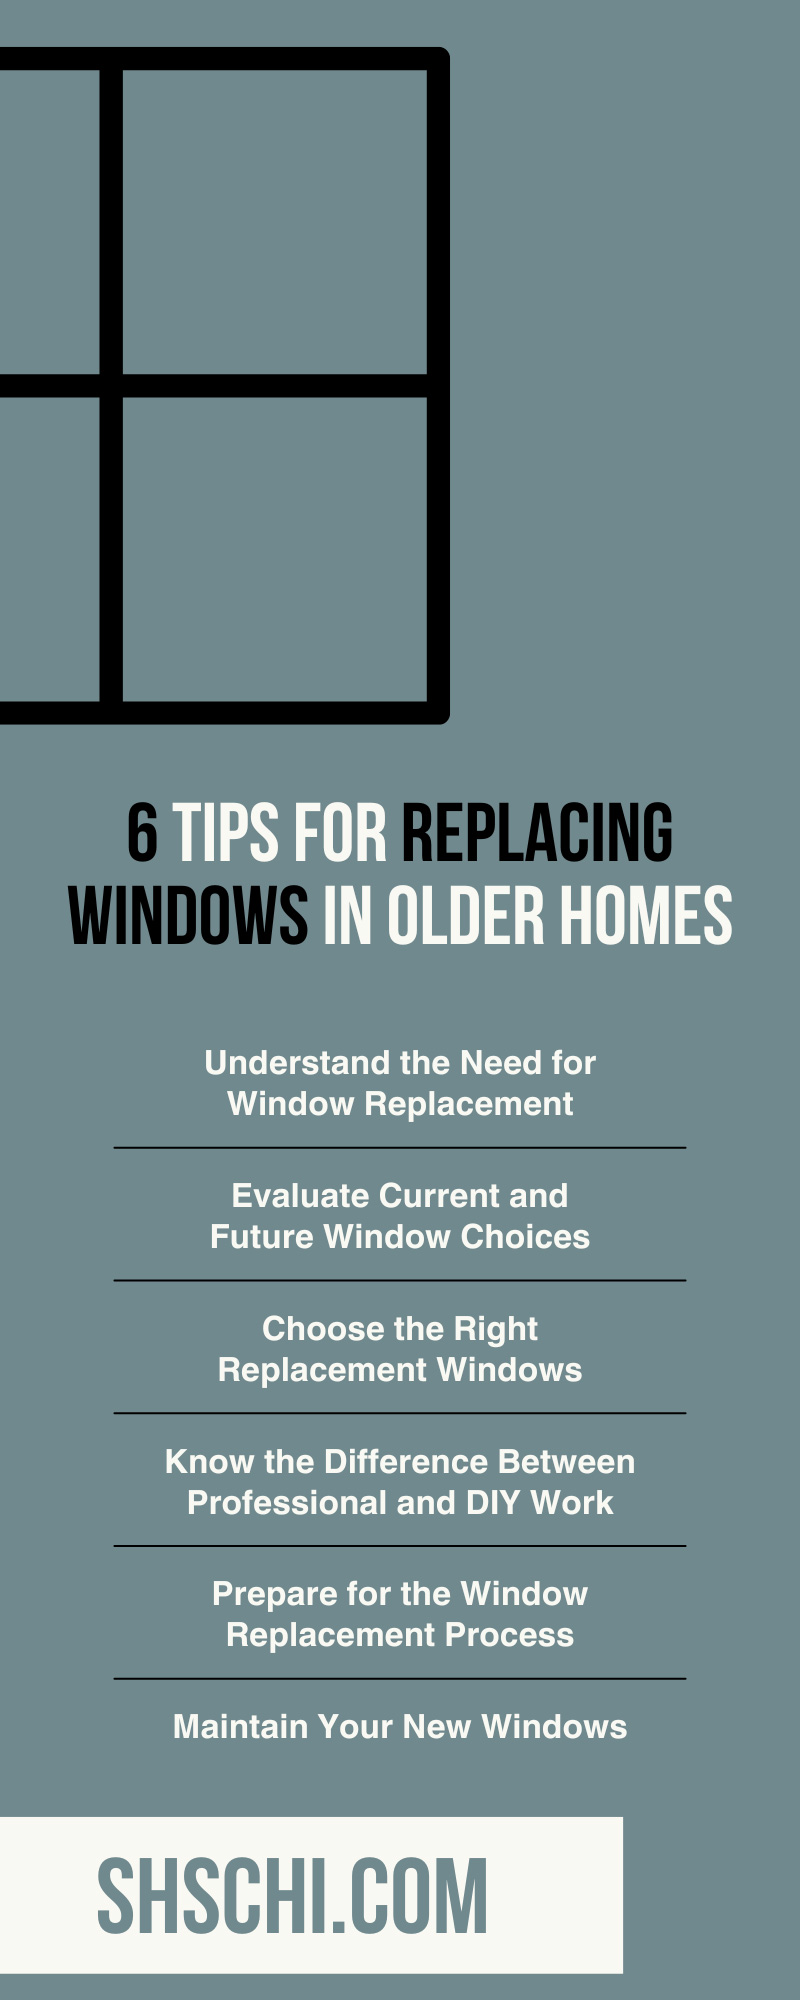 6 Tips for Replacing Windows in Older Homes